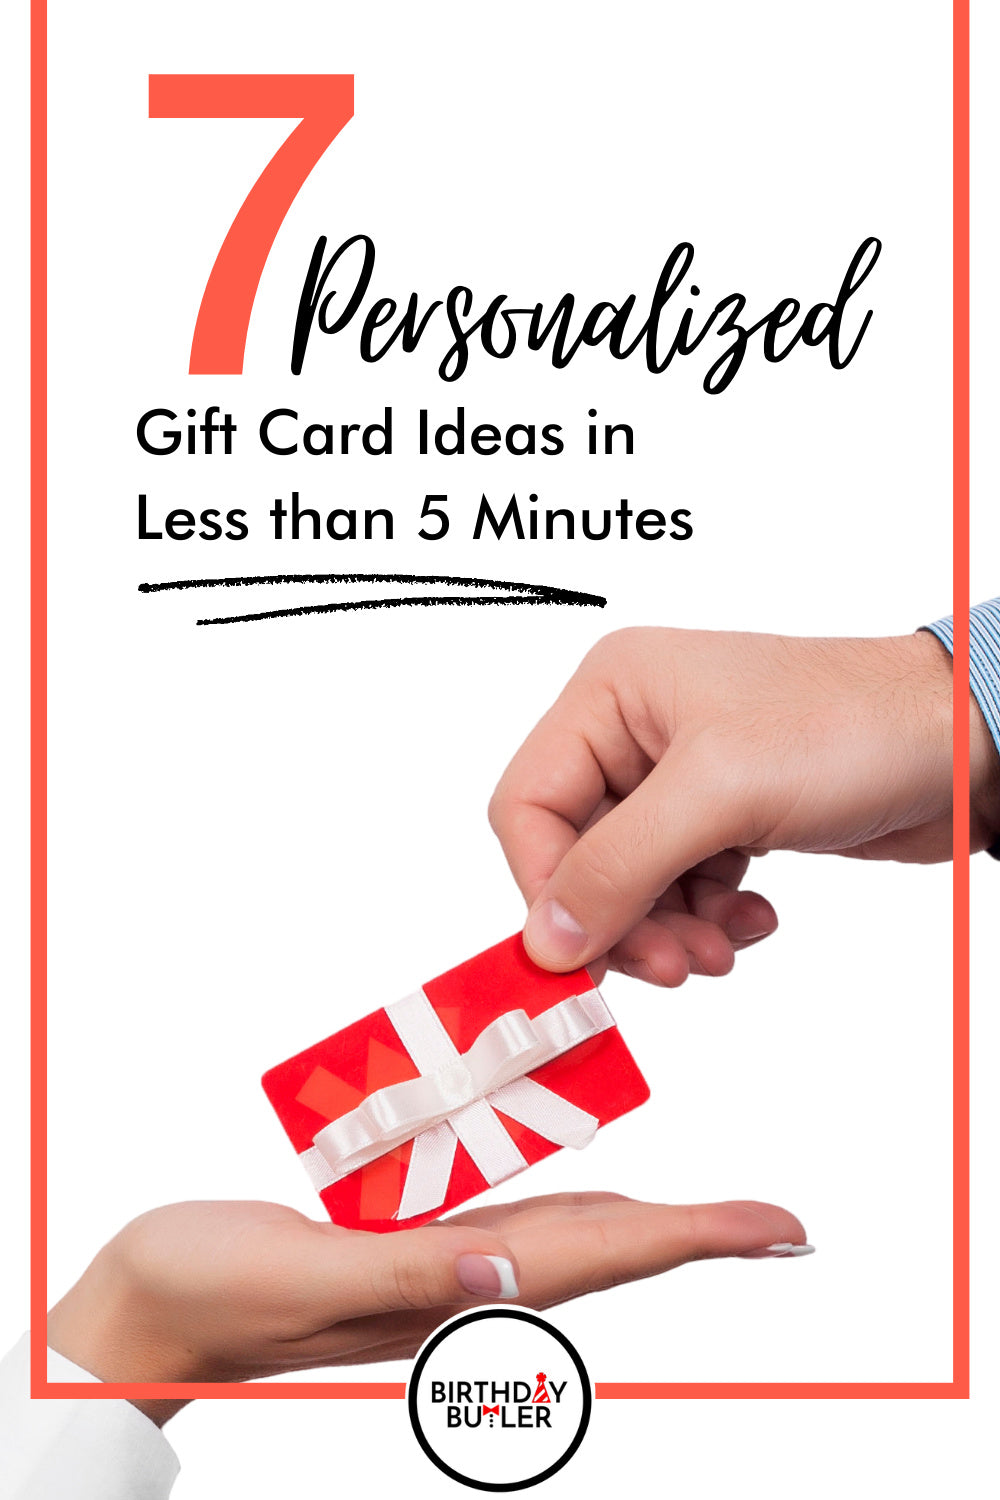 How to Buy Gift Cards for Less